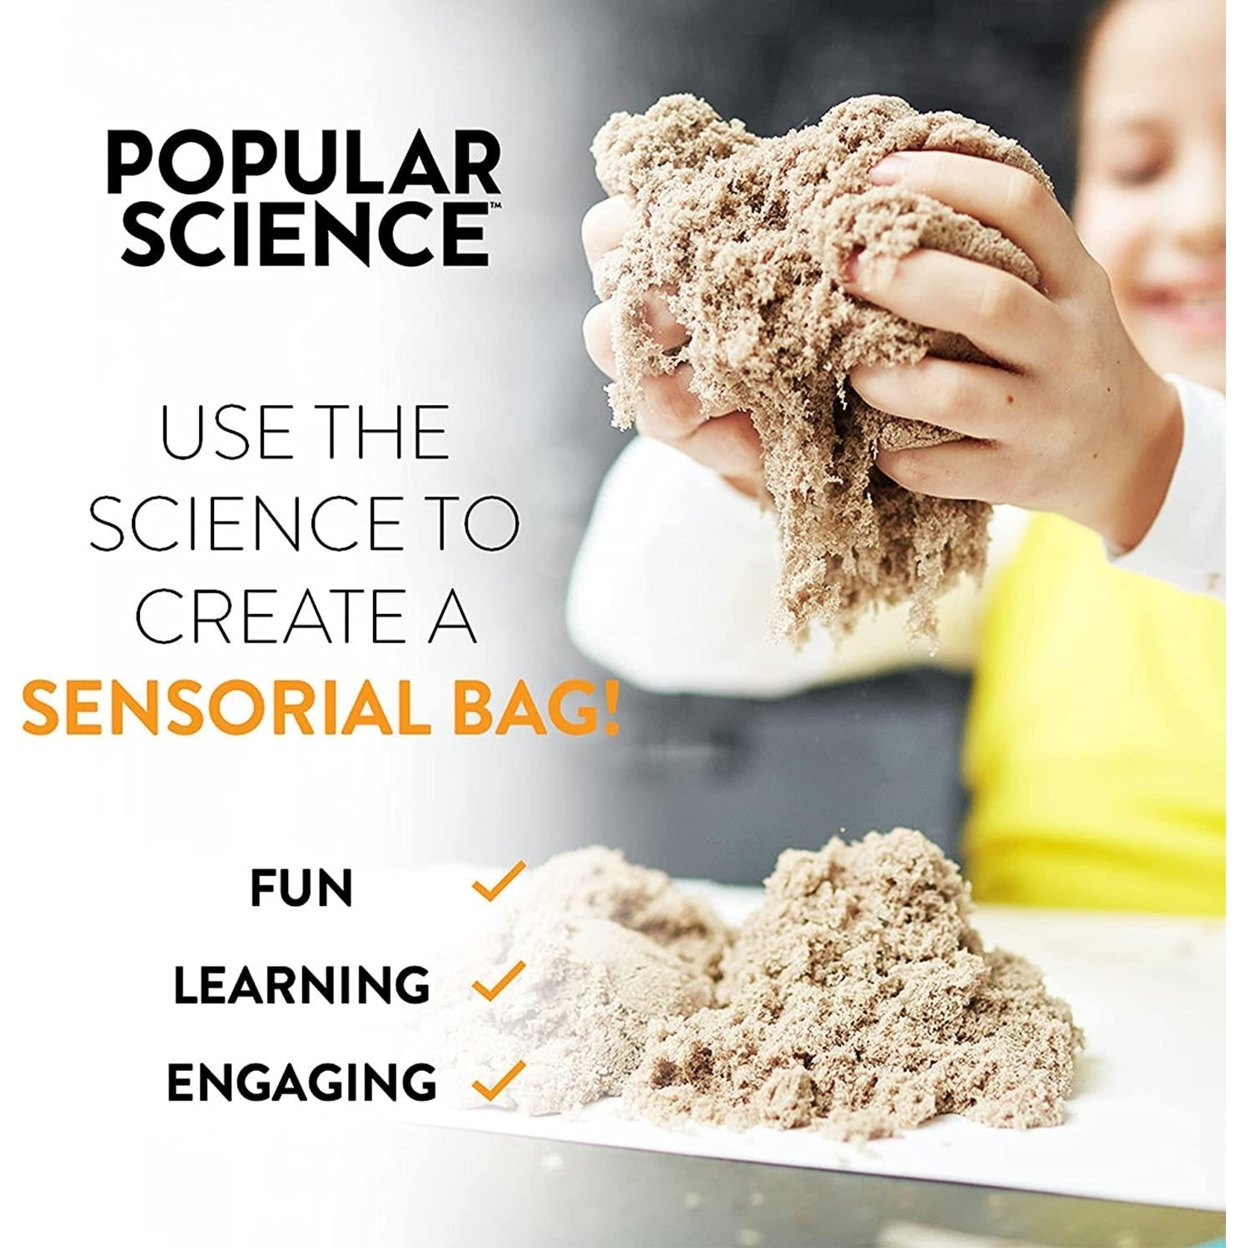 Popular Science 5 Senses Discovery Lab Kit Educational Kids Interactive WOW! Stuff